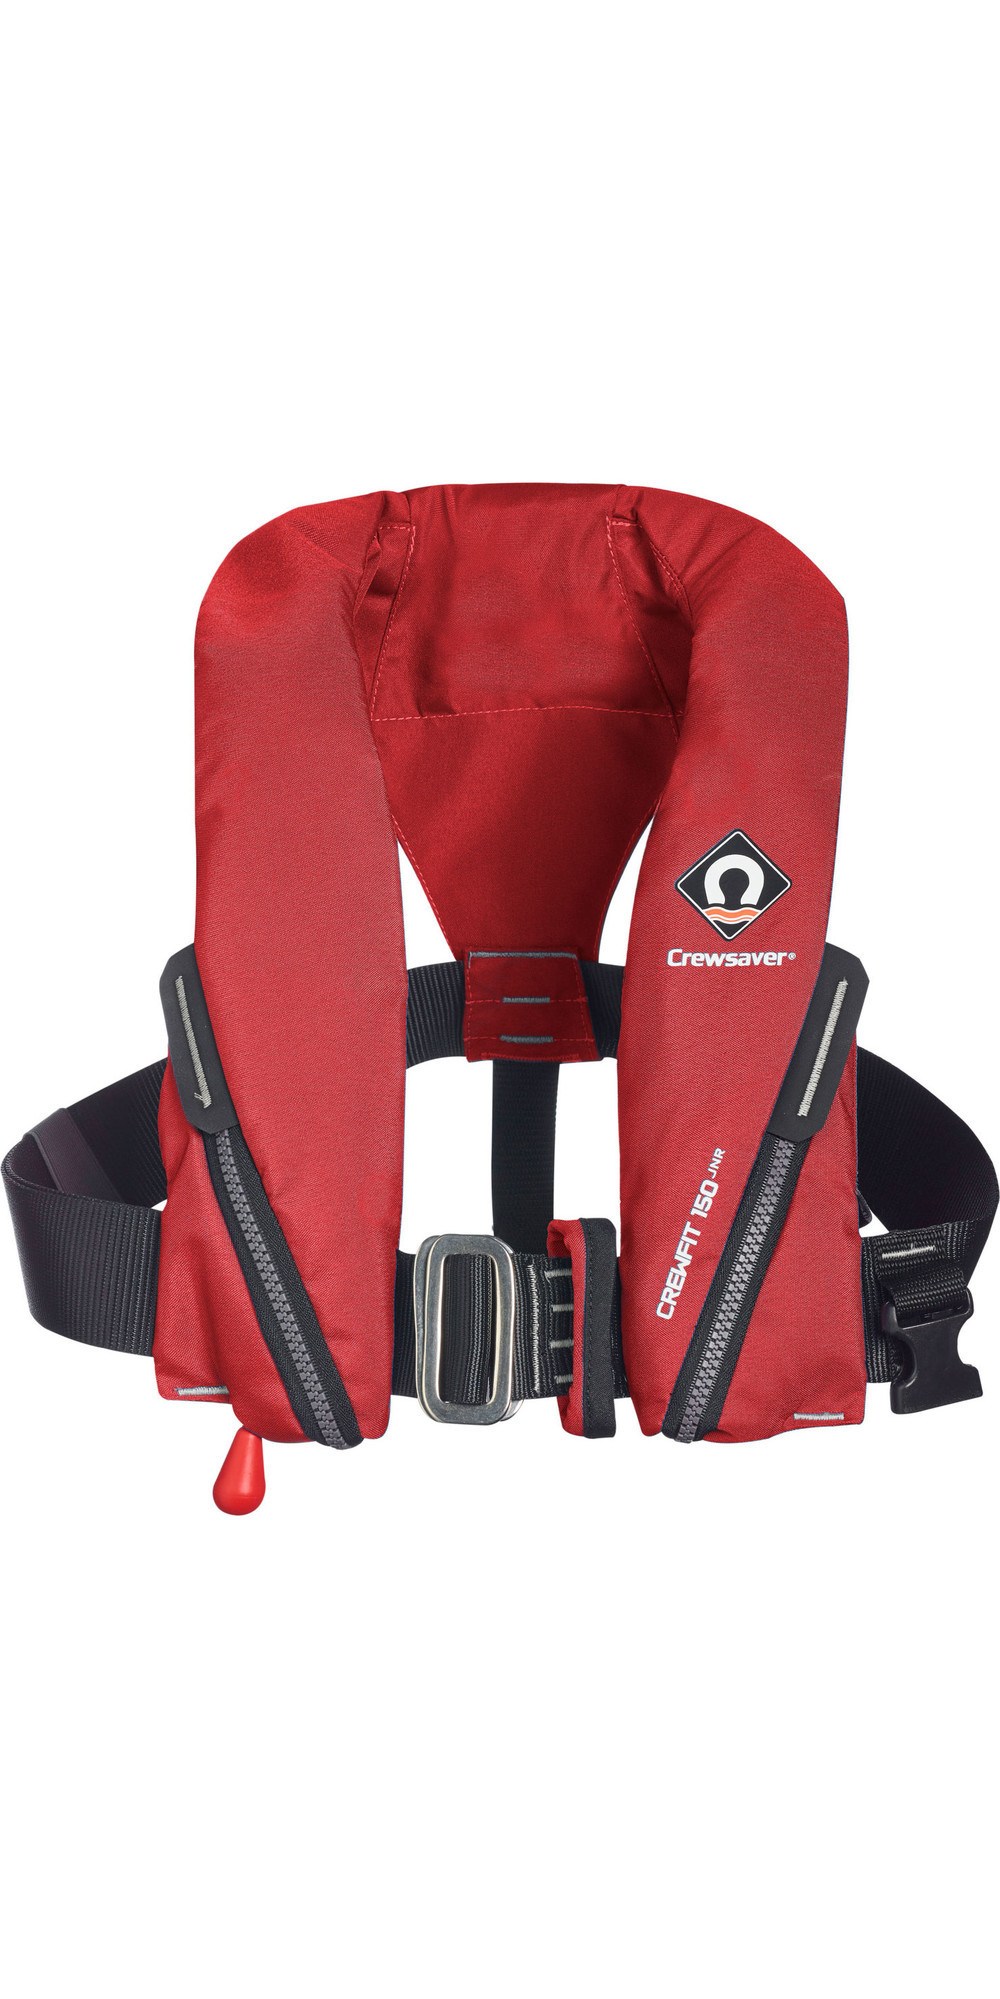 Lifejacket with harness